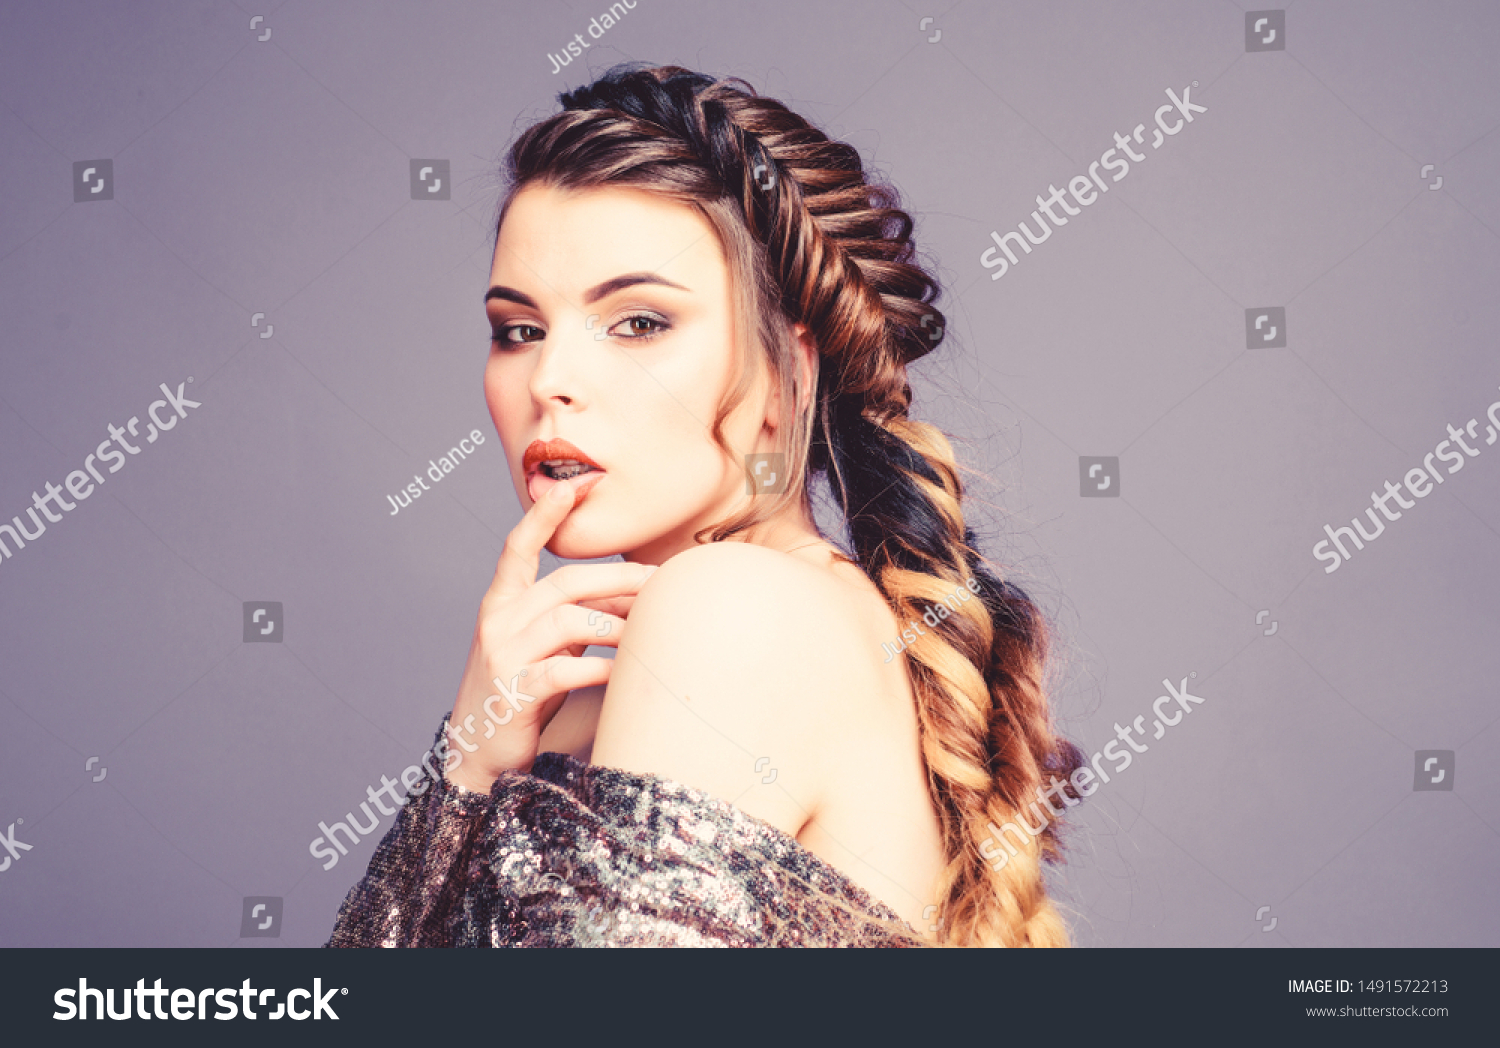 French braid. Professional hair care and creating hairstyle. Braided hairstyle. Beautiful young woman with modern hairstyle. Beauty salon hairdresser art. Girl makeup face braided long hair. #1491572213